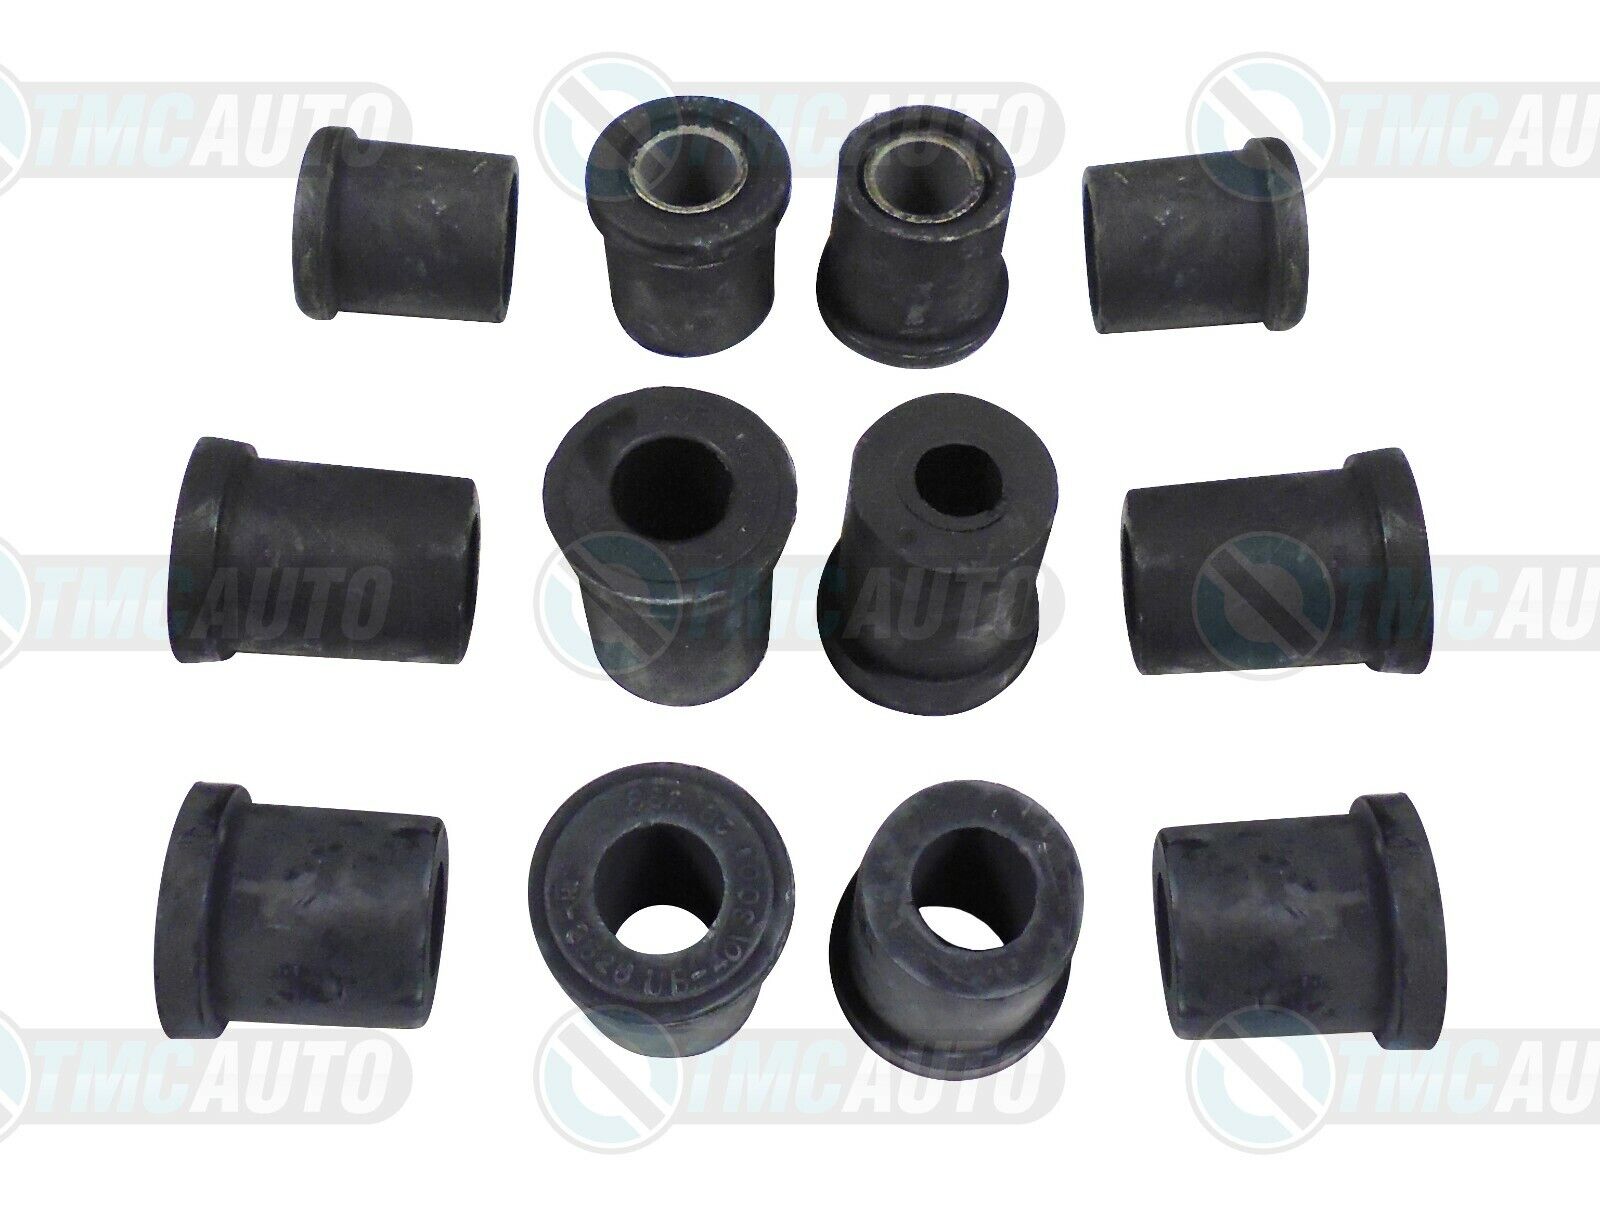 Rear Spring Bush Kit Rubber Bushes to suit Mazda Bravo B2600 Ford Courier 91-05